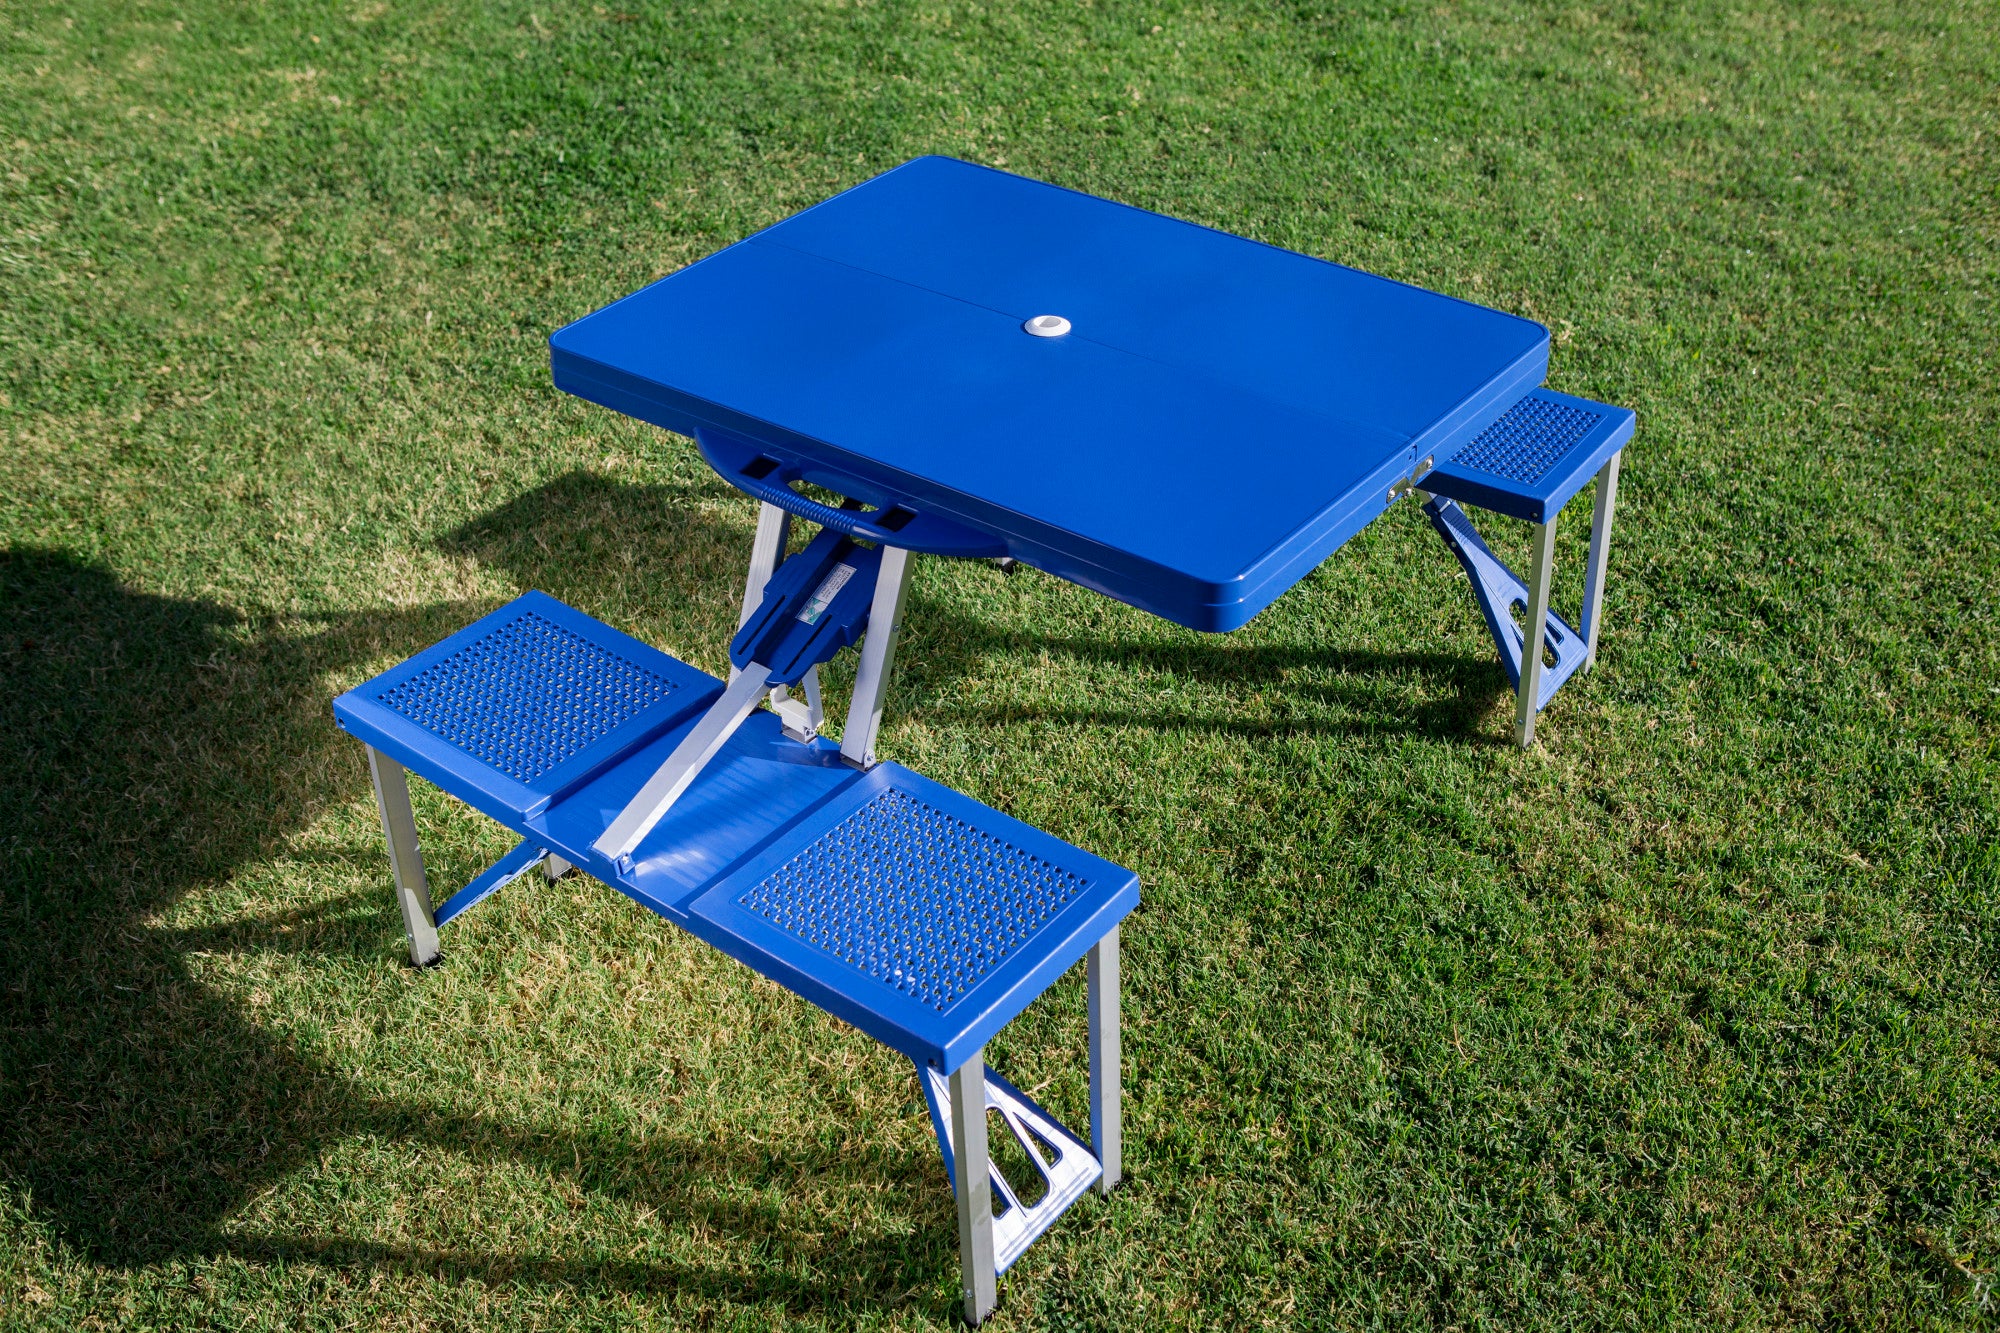 New York Islanders - Picnic Table Portable Folding Table with Seats